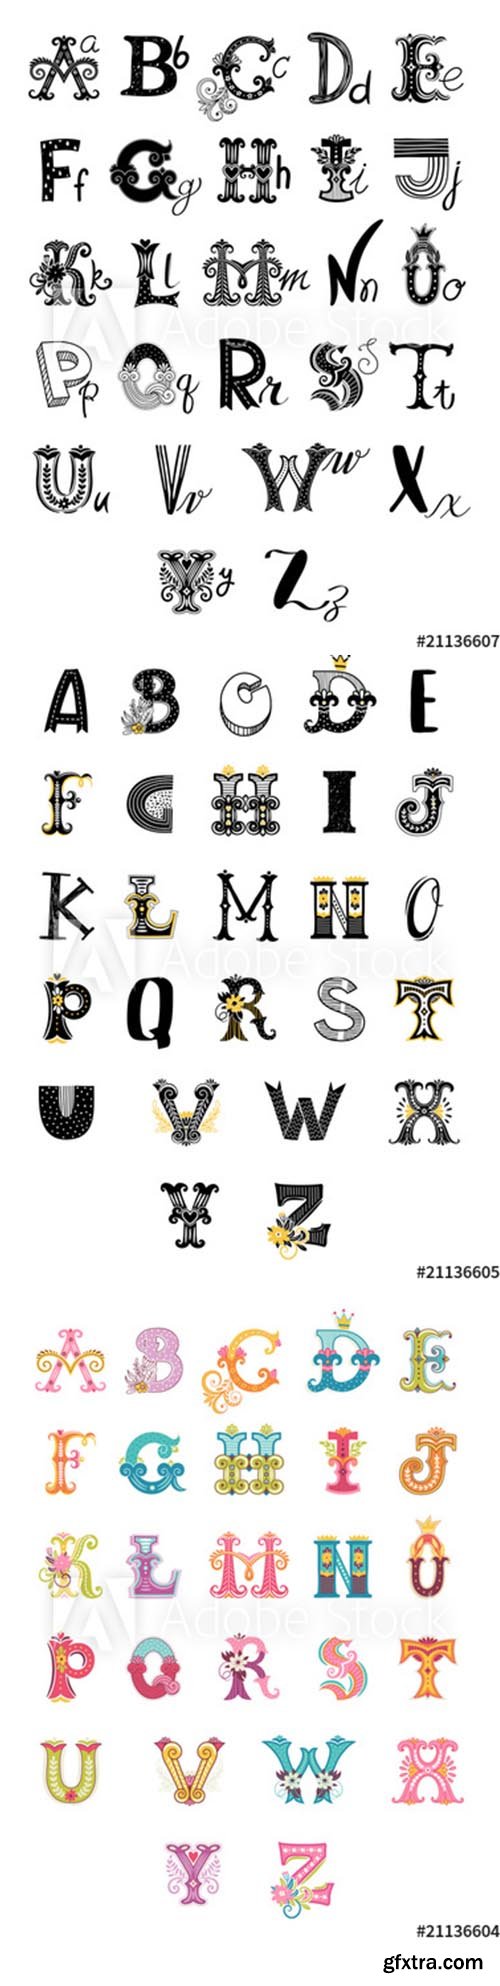 Alphabet letters in different style